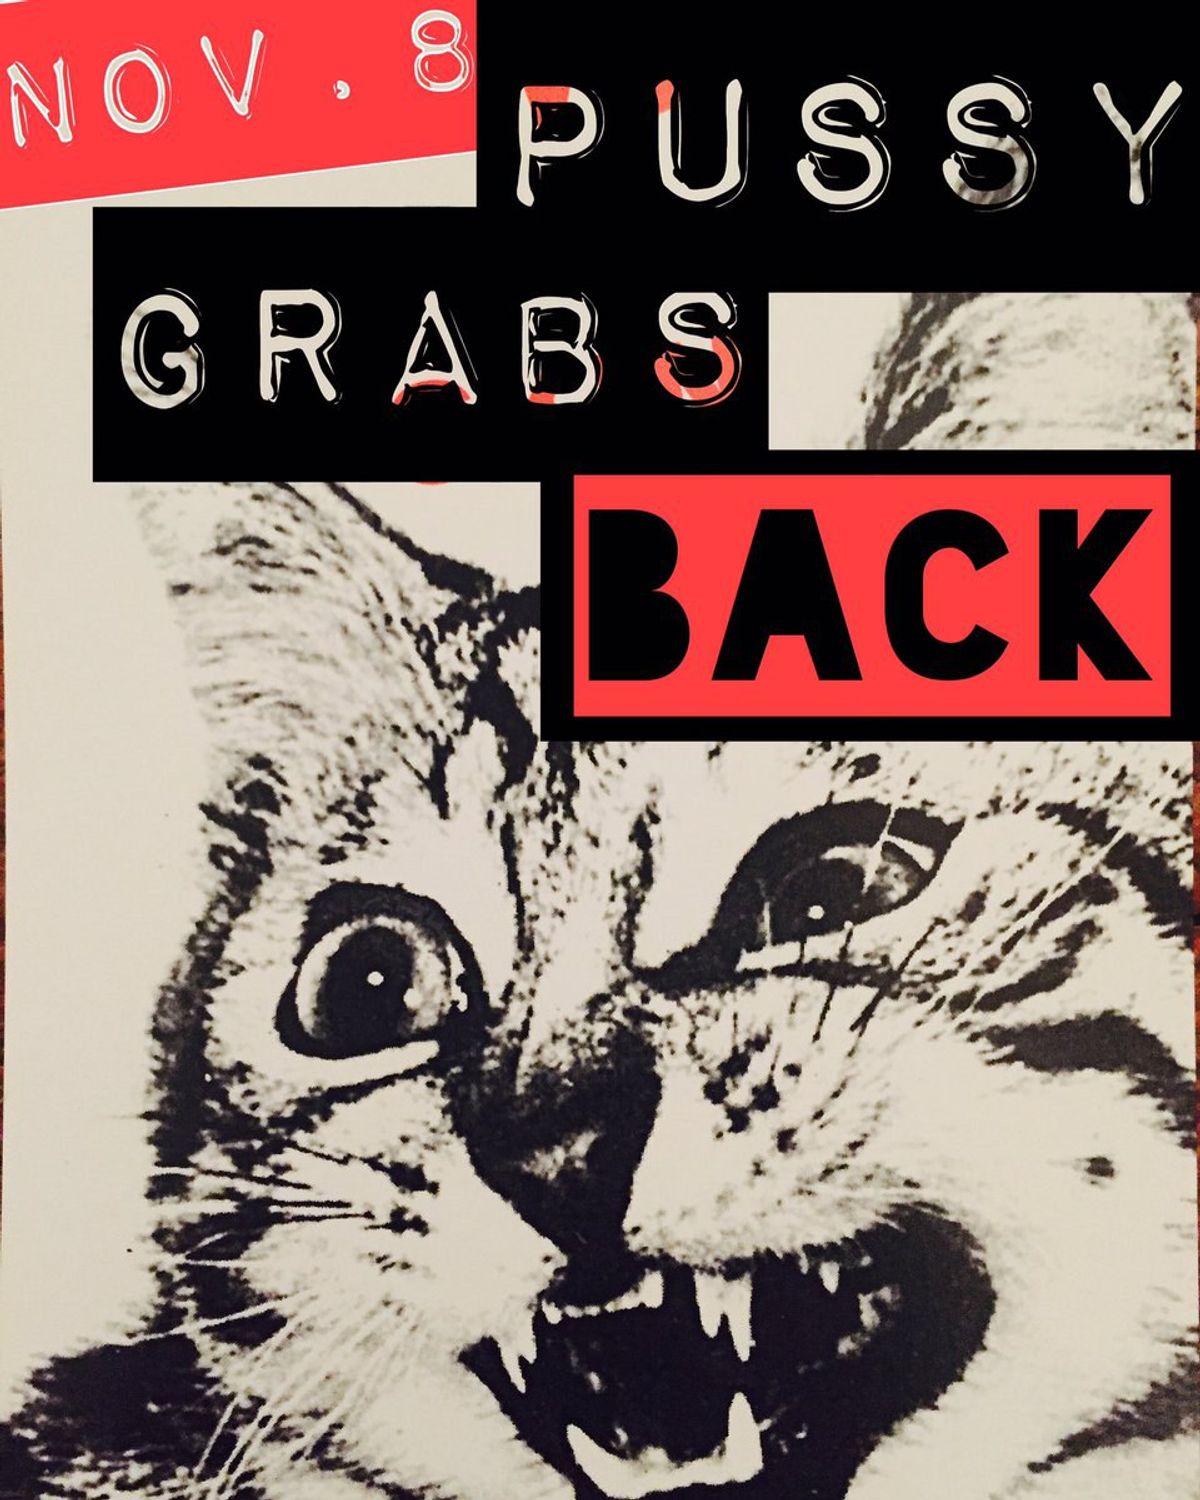 Nov. 8: The Day Pussy Grabs Back